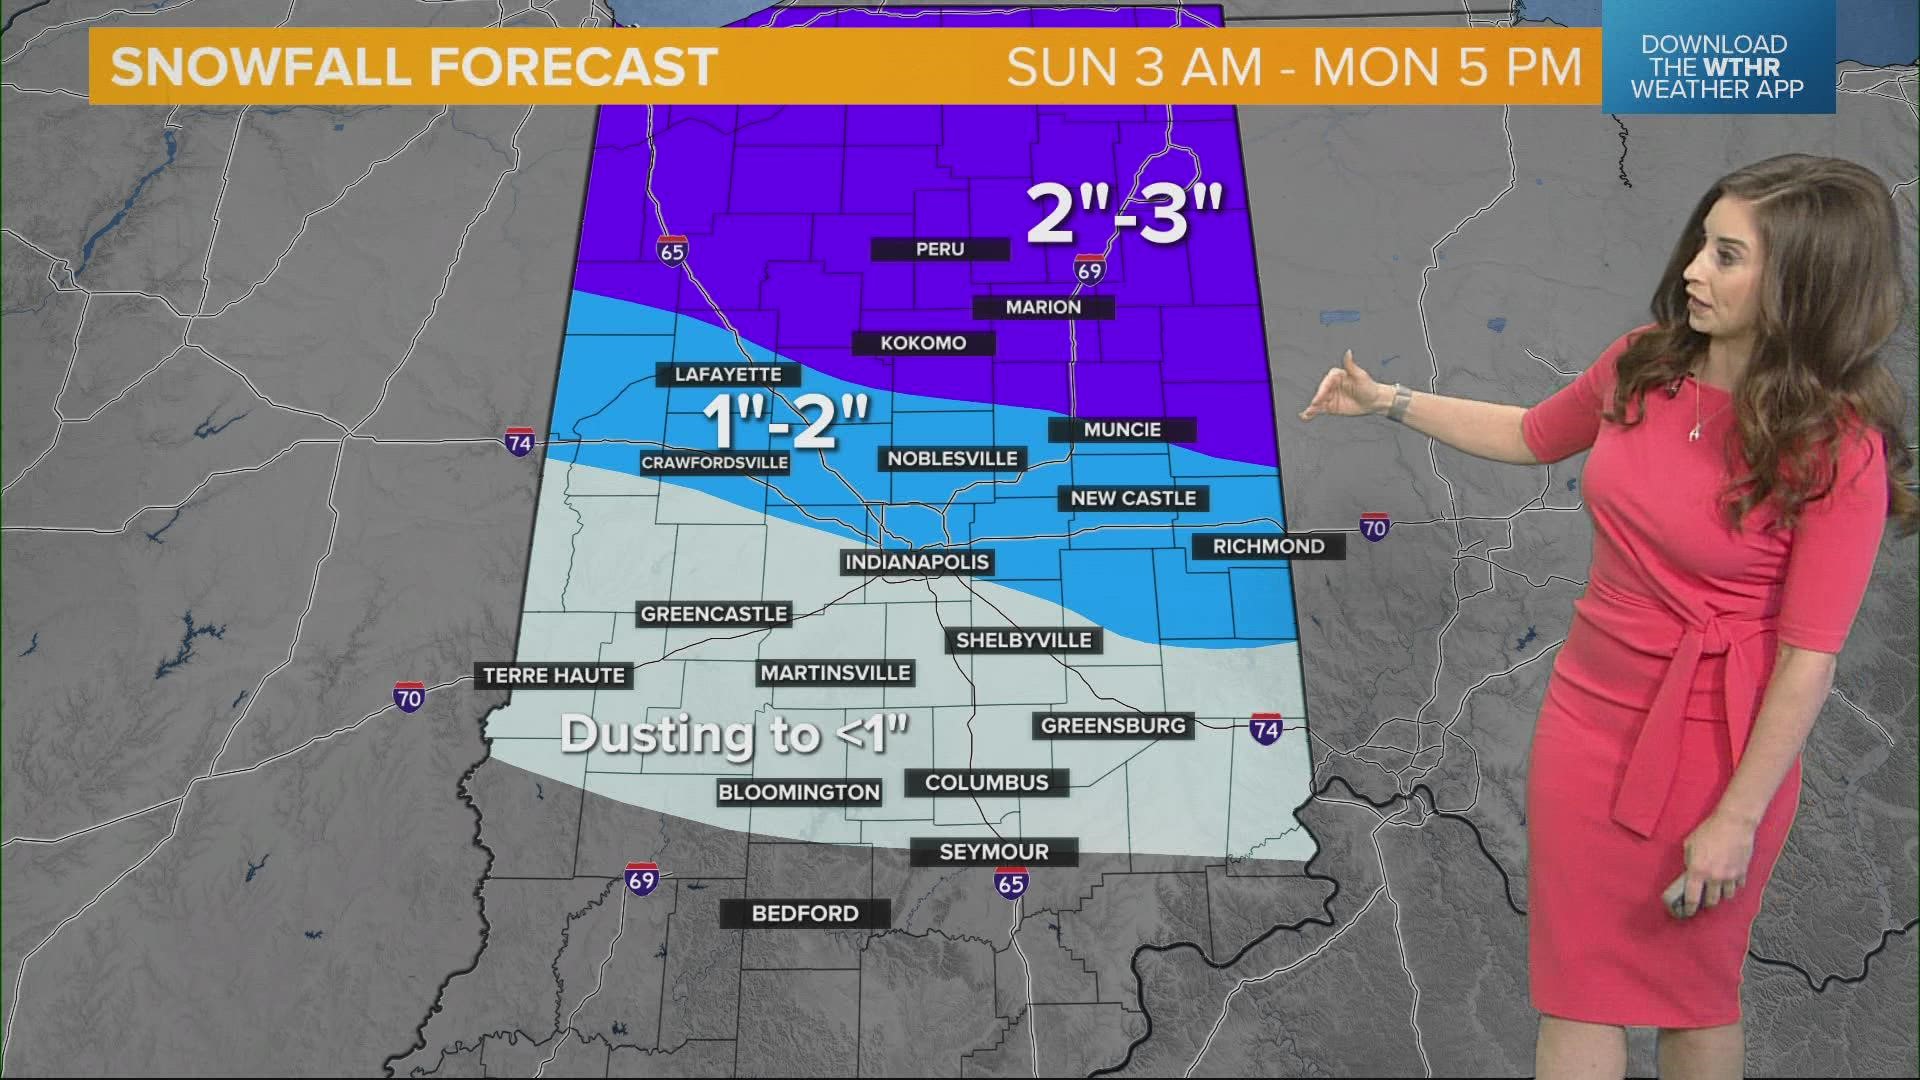 Portions of central Indiana should expect between 1 and 3 inches of snow Sunday morning.